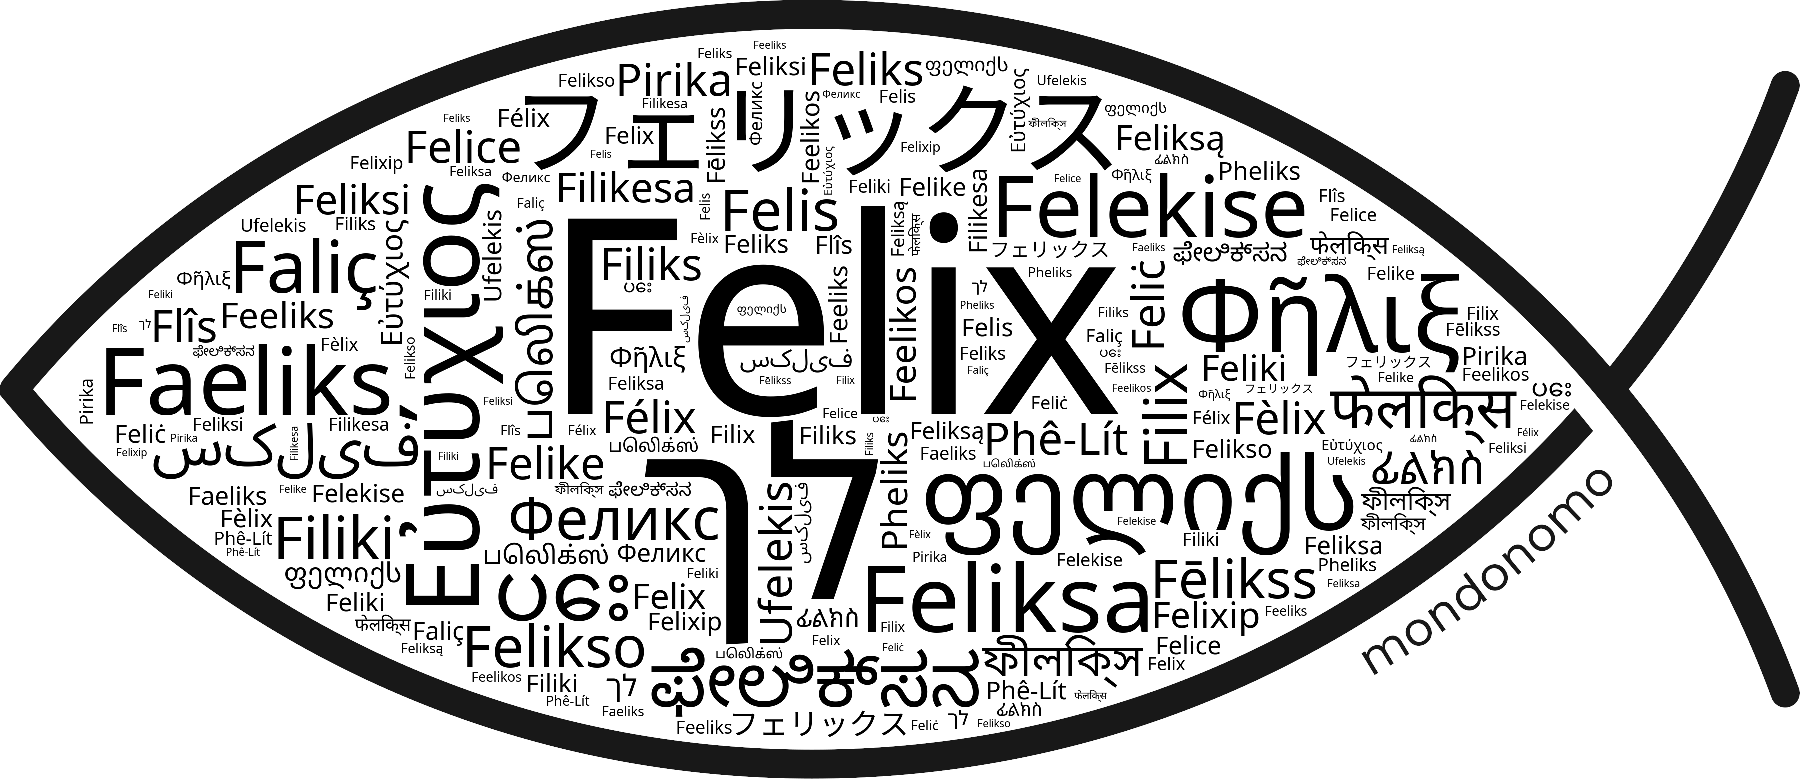 Name Felix in the world's Bibles